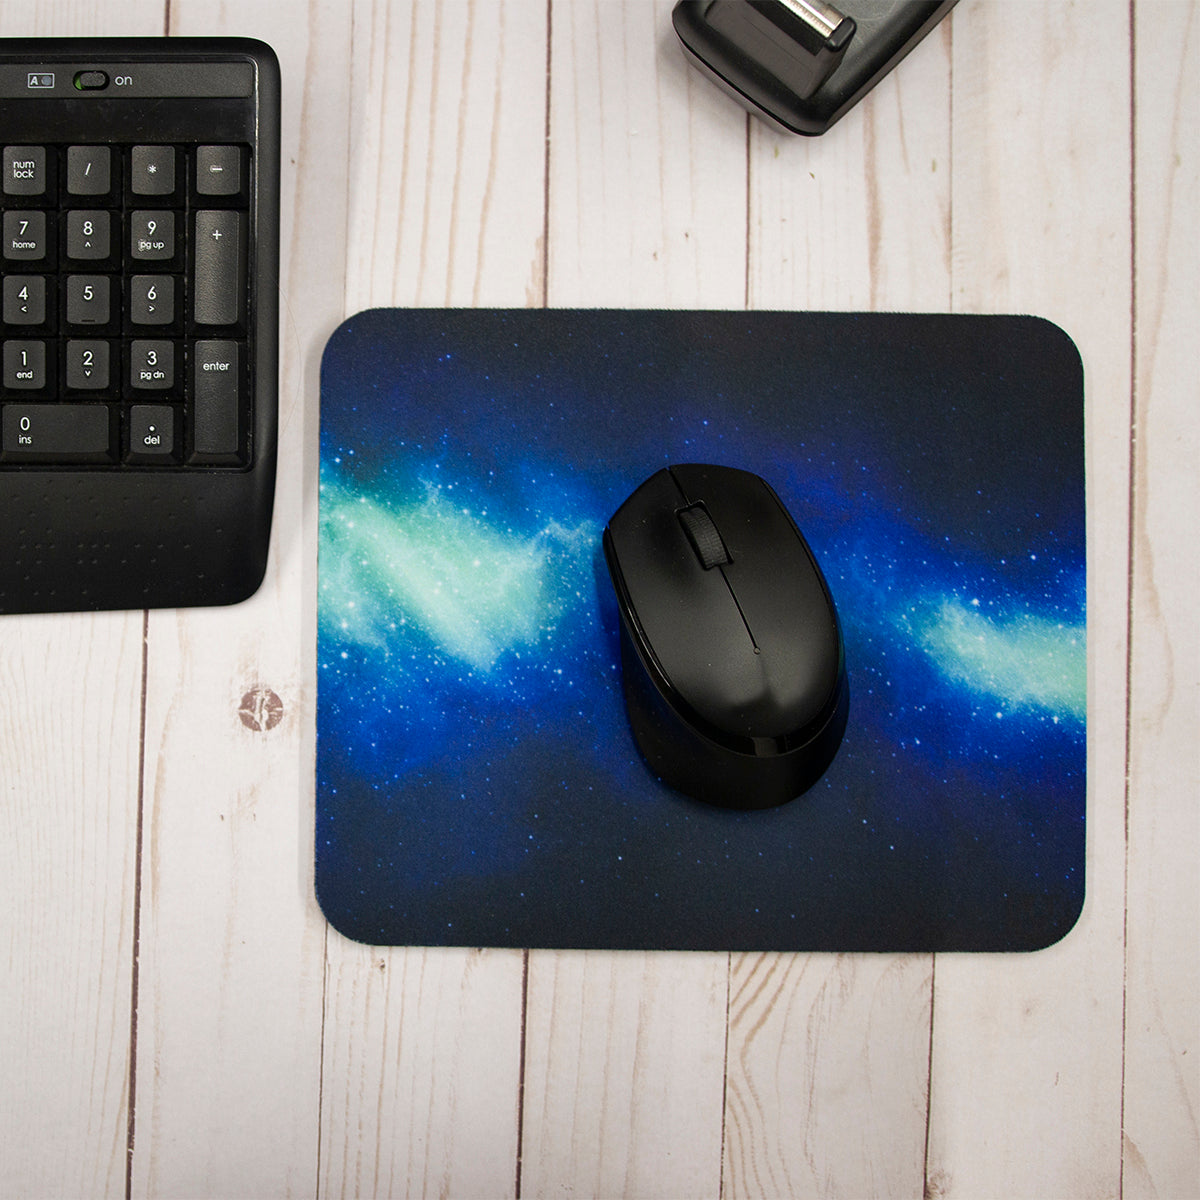 Shattered Glass Mousepad - Mousepad for Gaming